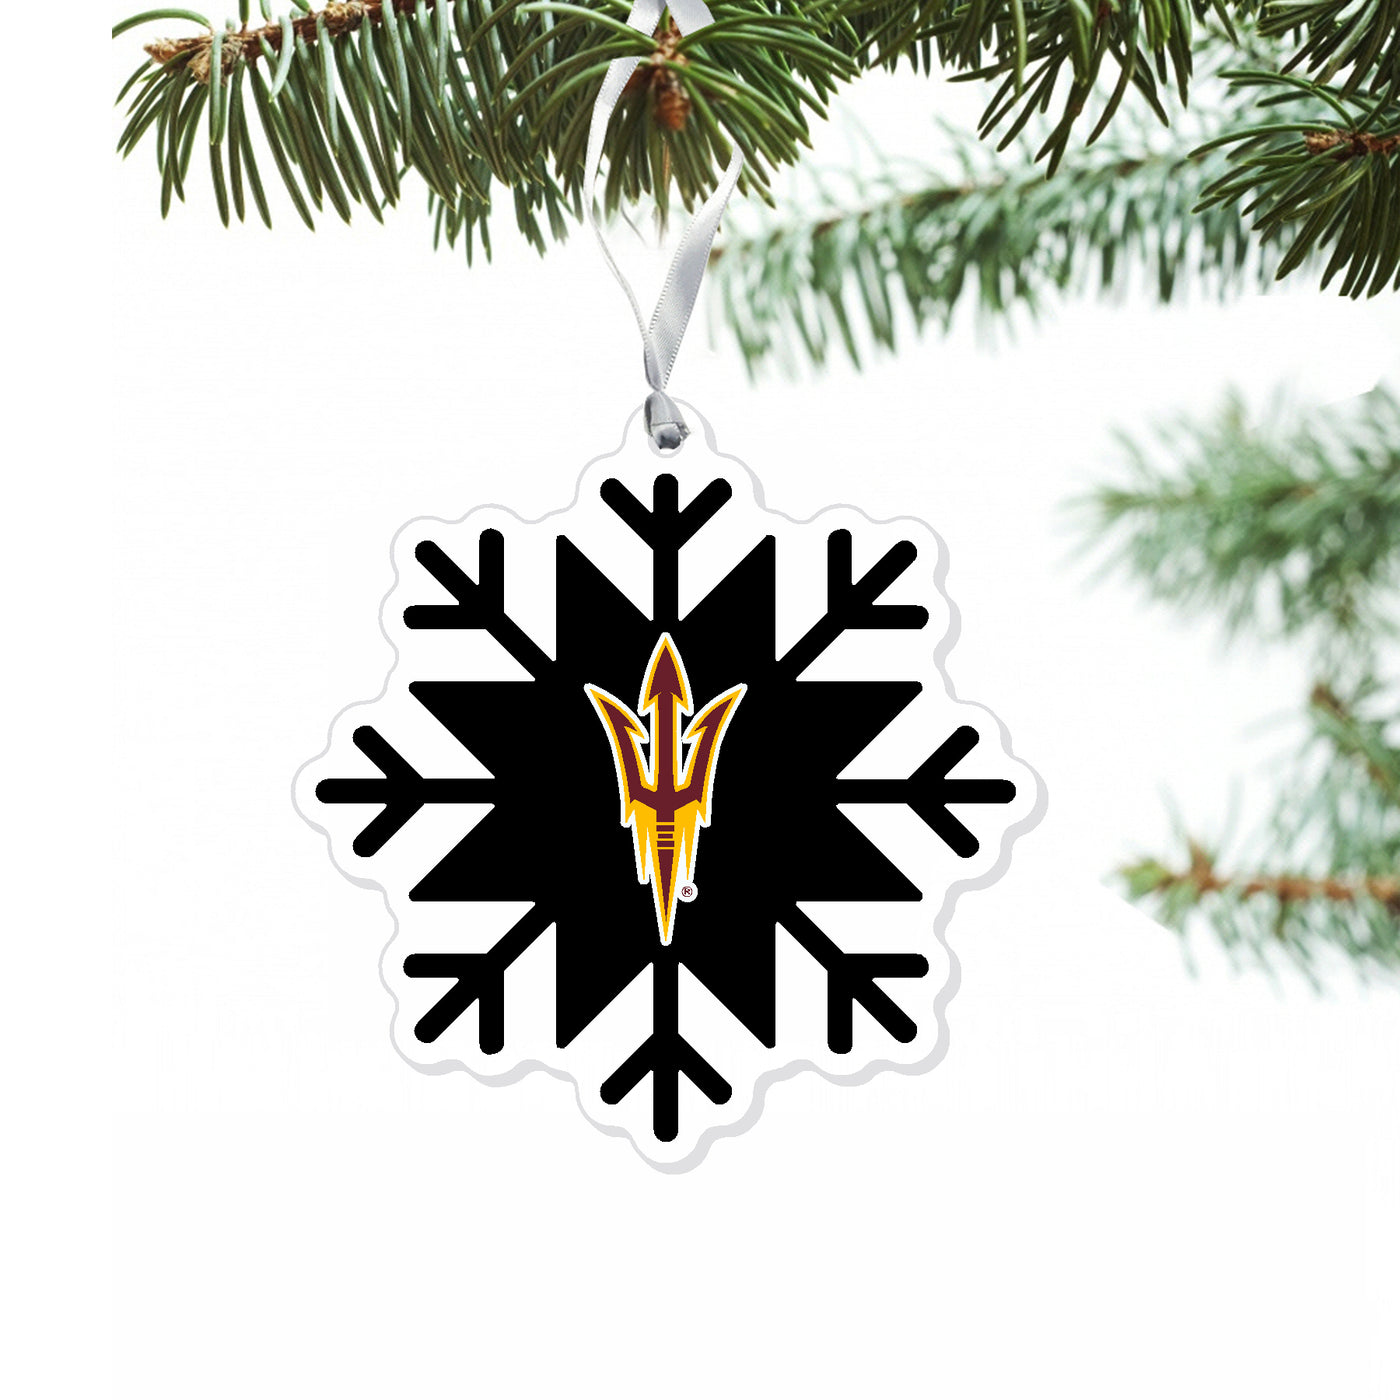 ASU black arcylic snowflake ornament with gold and maroon pitchfork in the center of the snowflake